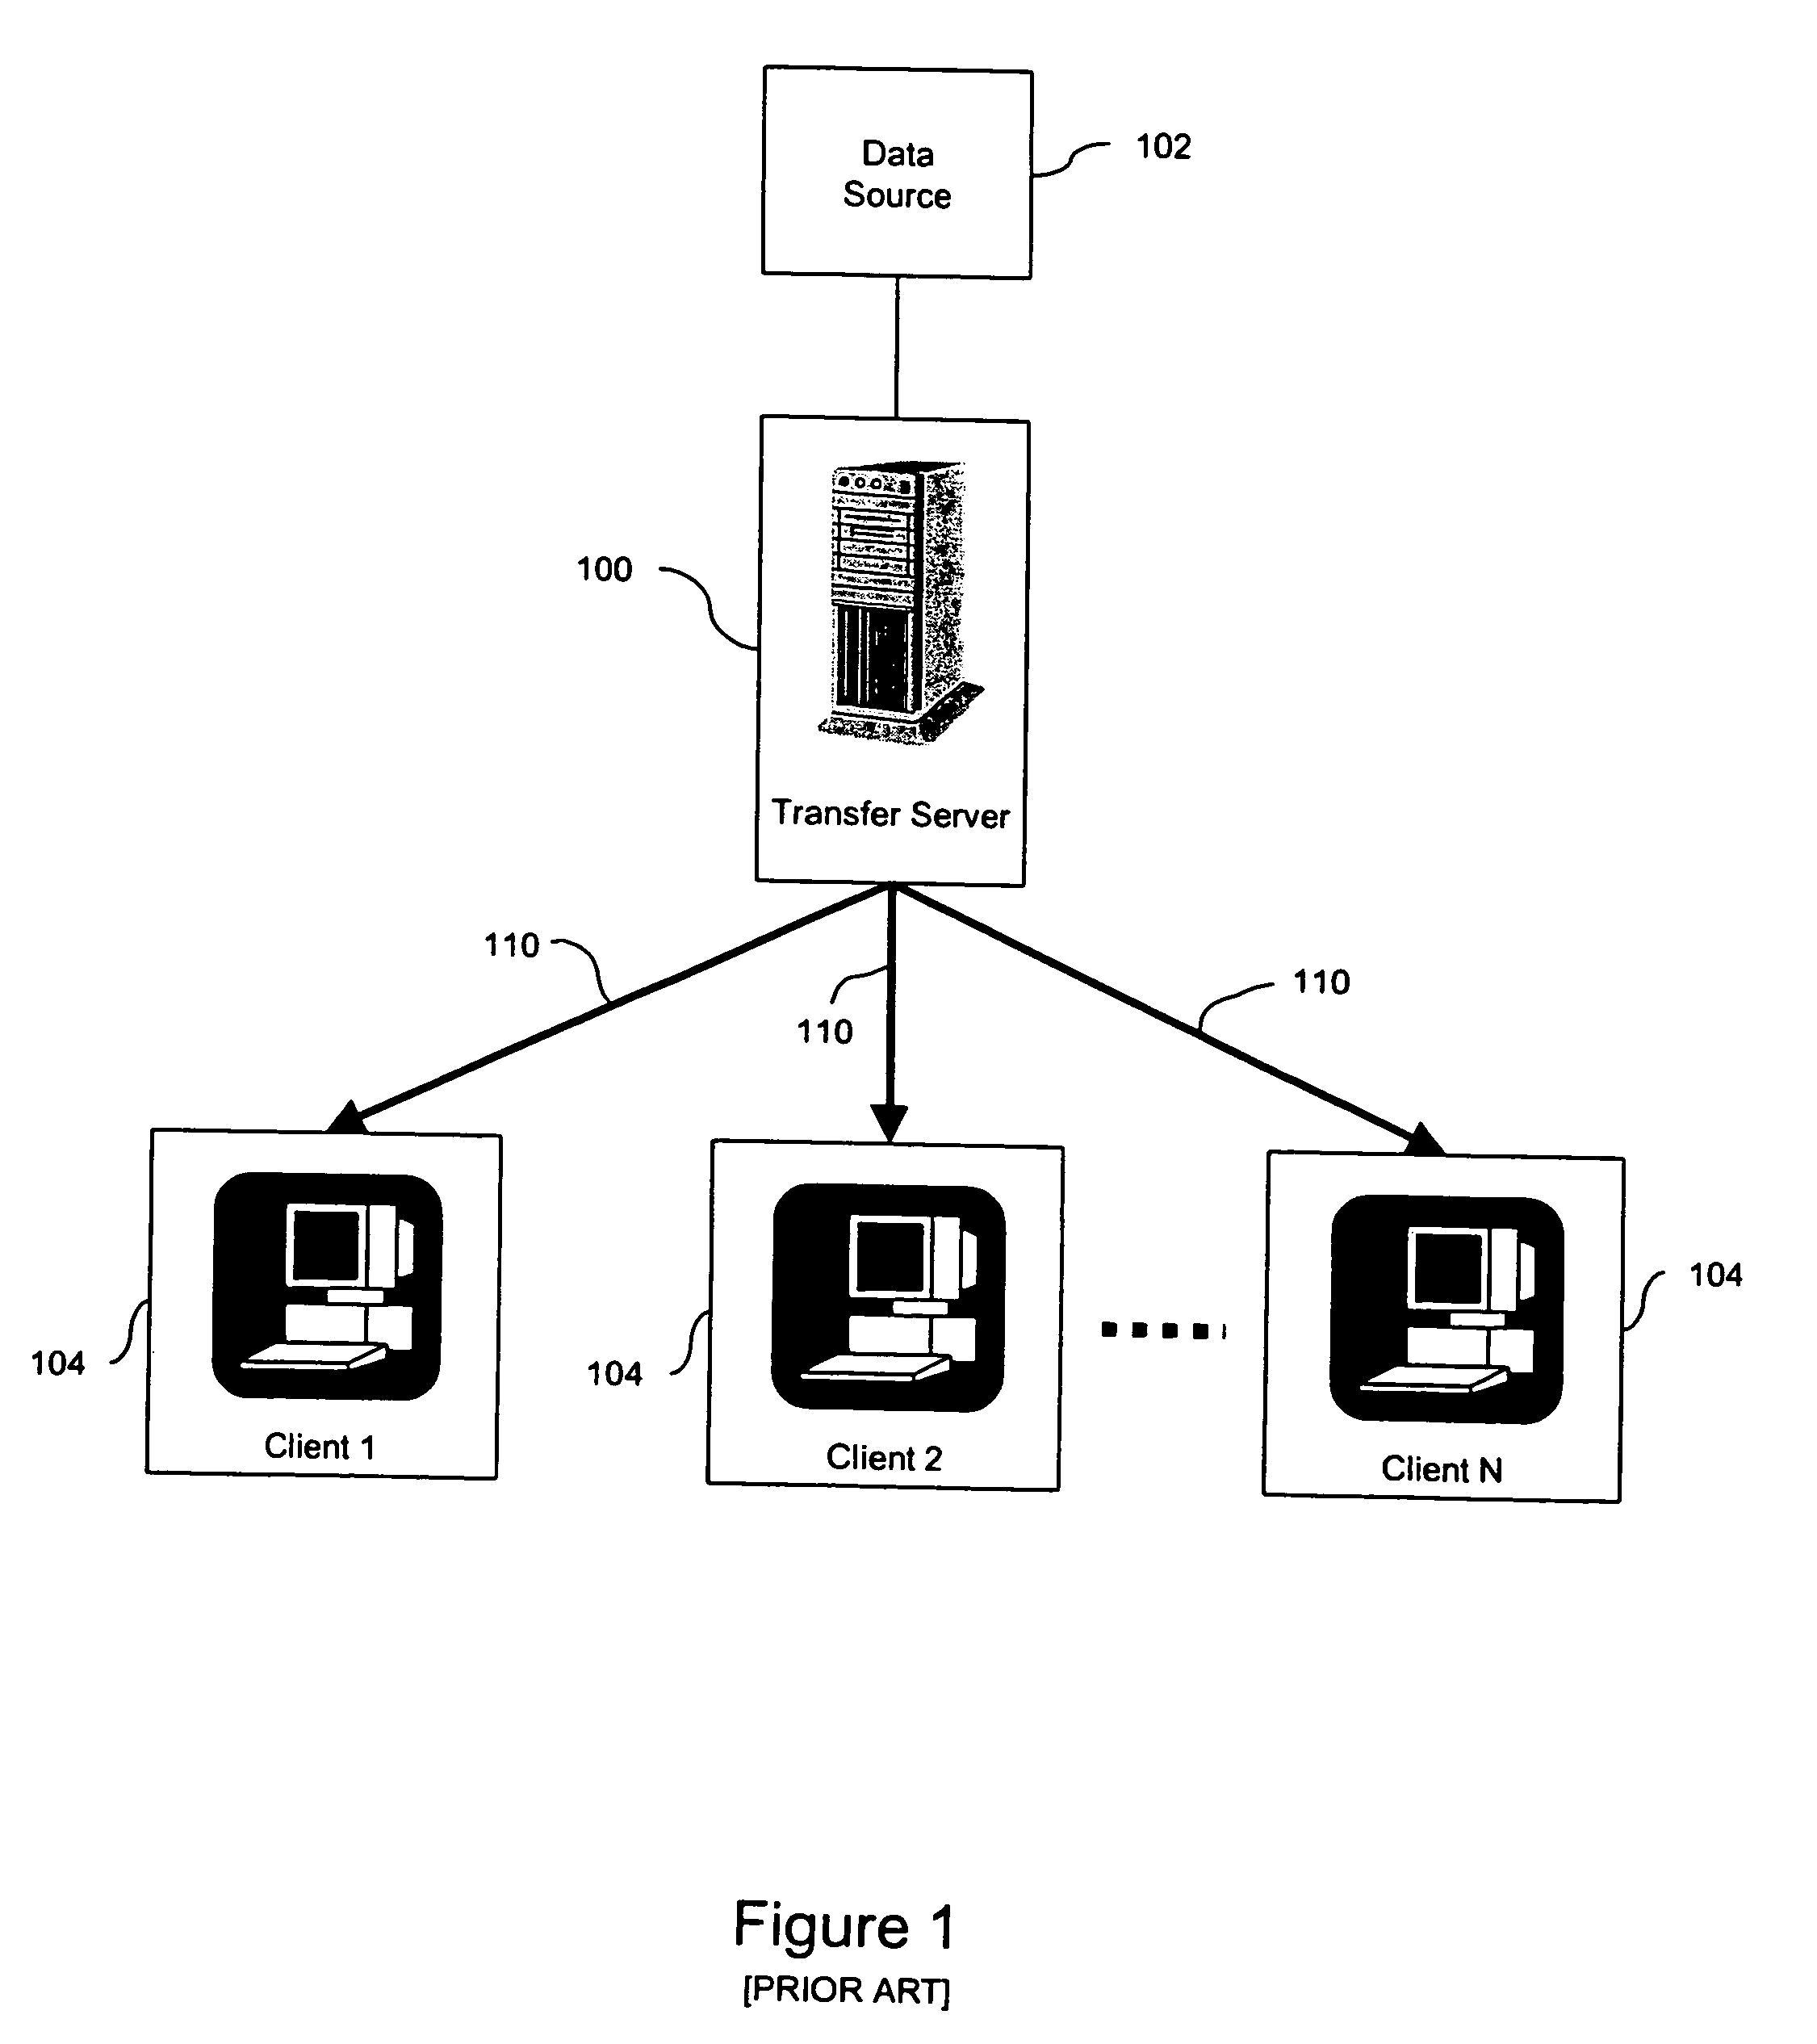 System and method for archiving process component is adapted to listen for a query for a missing data packet from a requesting client computer to read, retrieve and return the data packet corresponding to the referenced sequence number to the requesting client computer